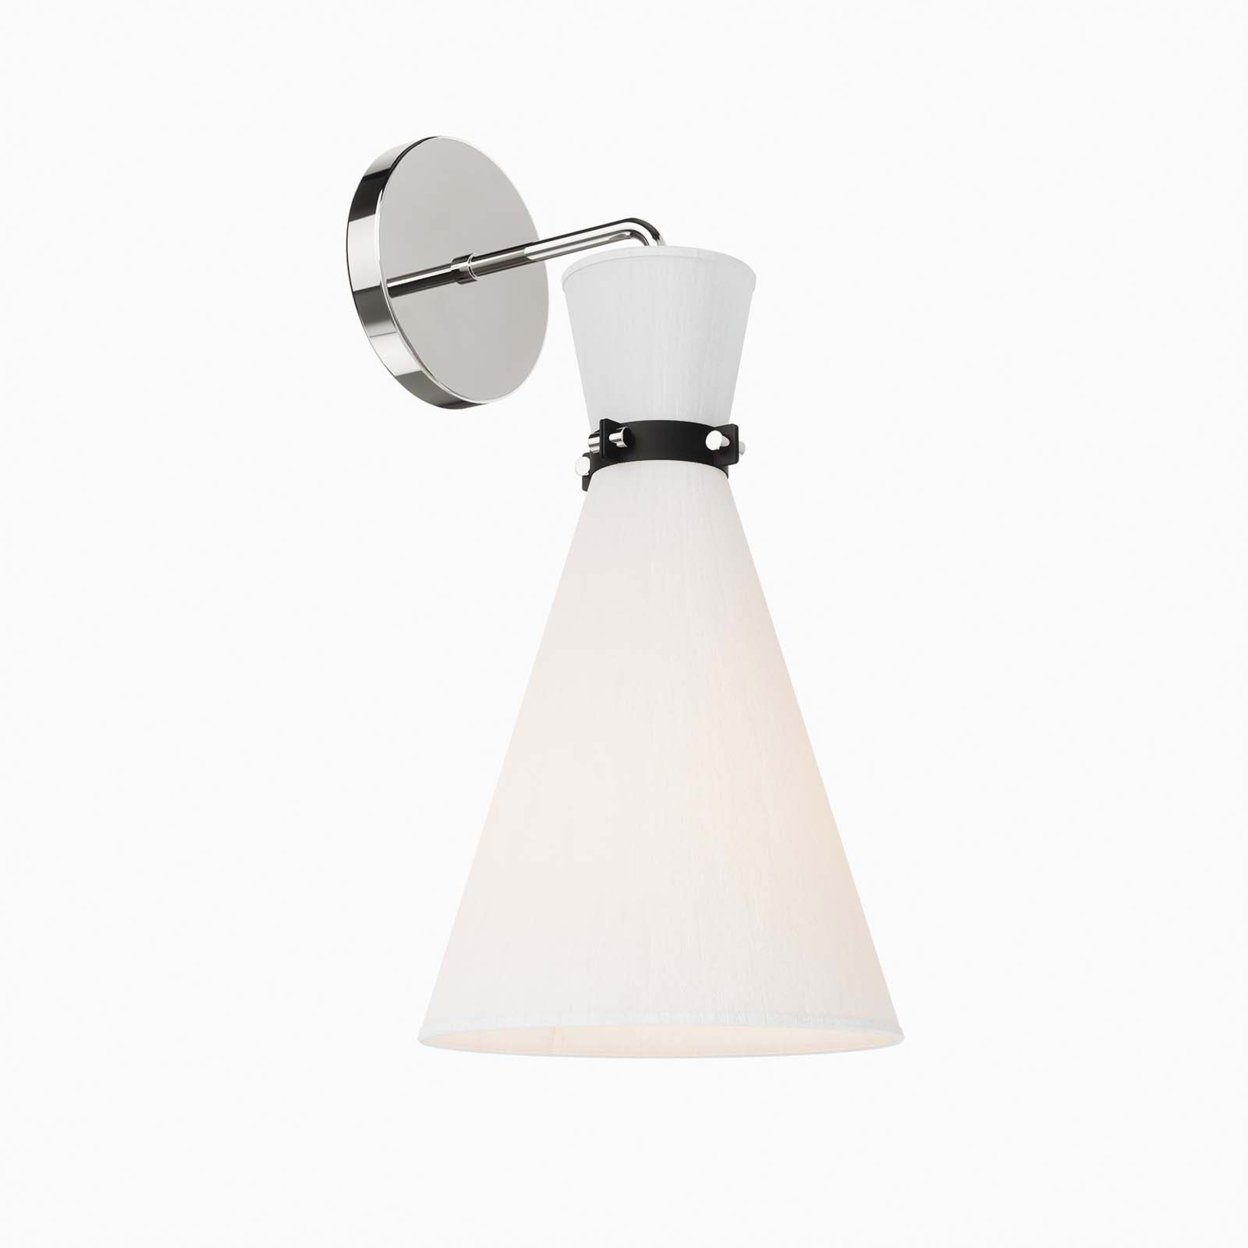 Starlight 1-Light Wall Sconce, White Polished Nickel